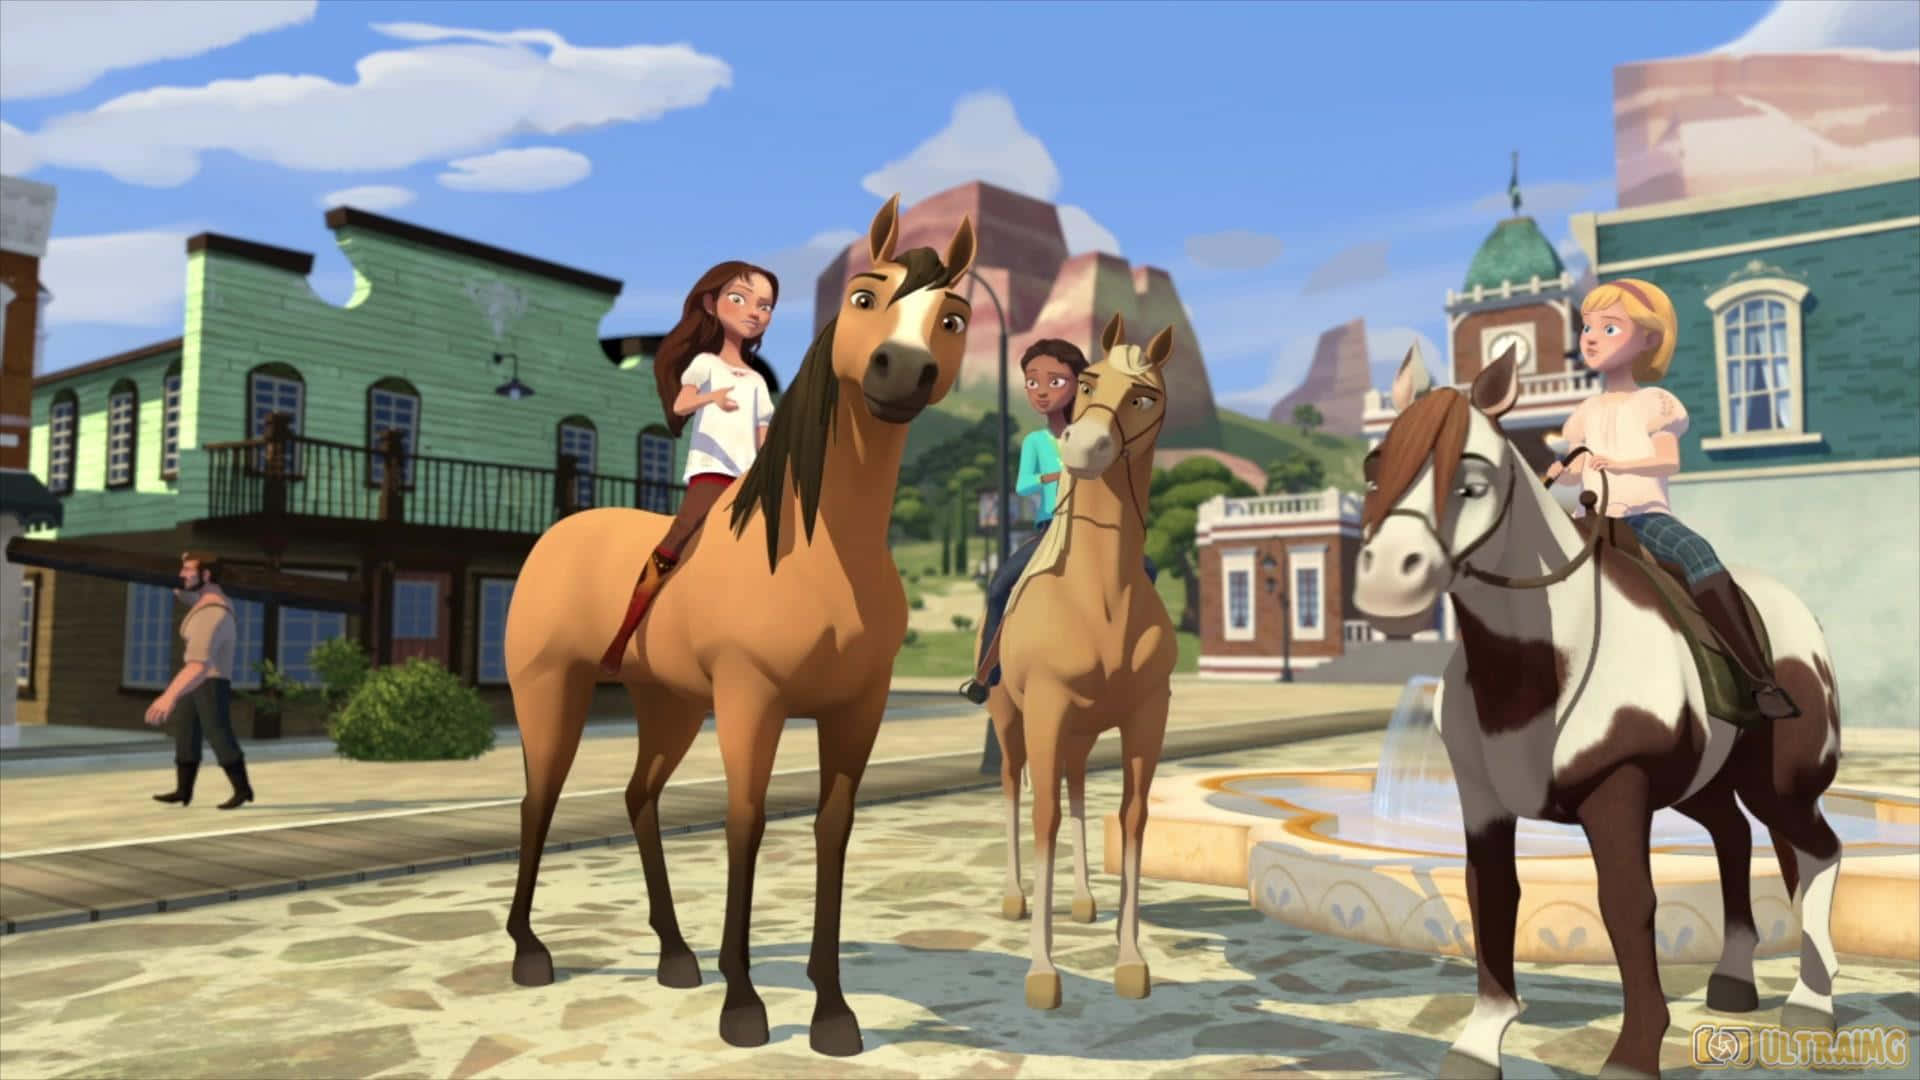 A Group Of People On Horses In A Cartoon Wallpaper